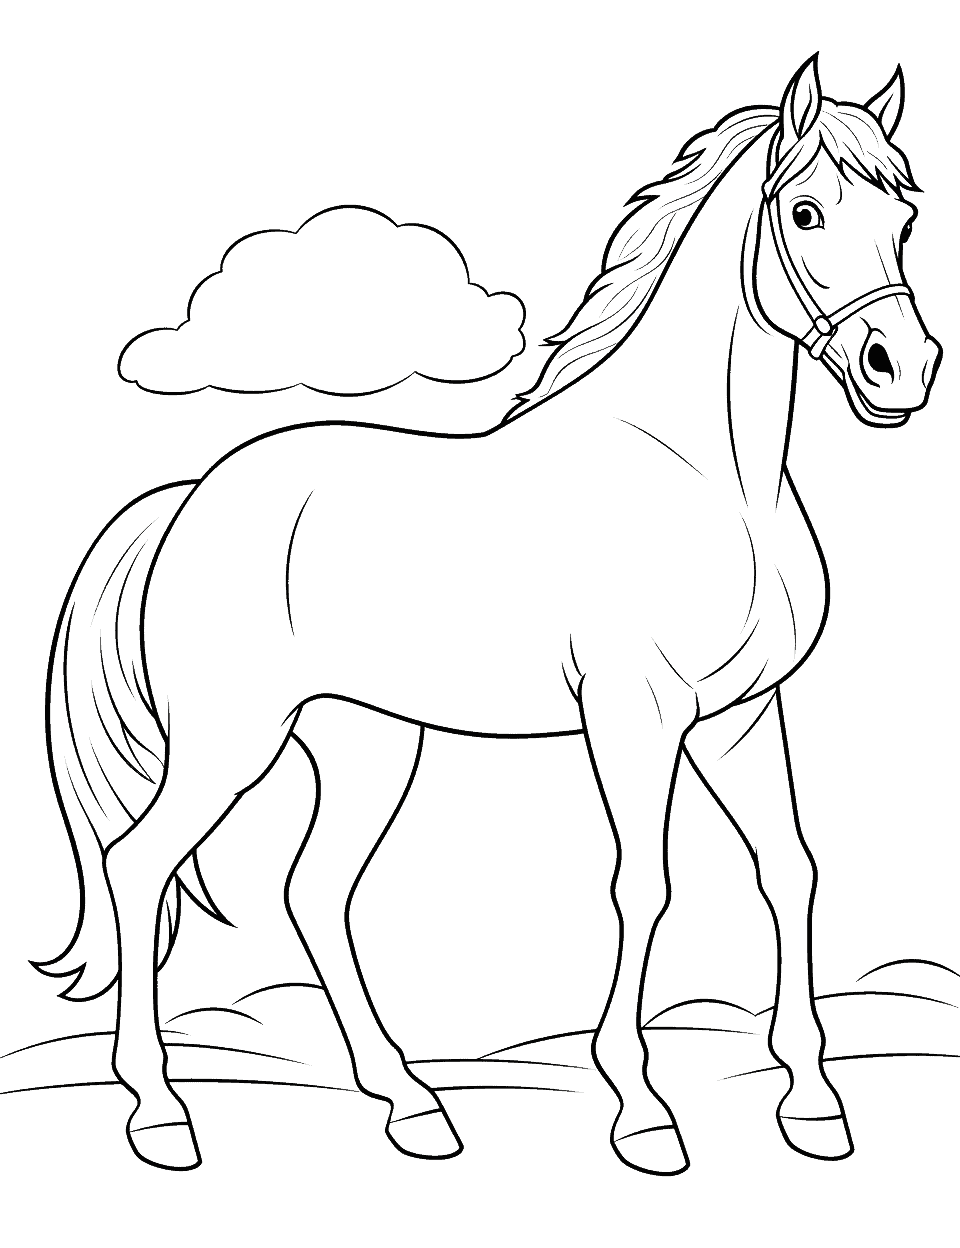 Easy Horse Drawing Coloring Page - An easy-to-color horse drawing that can help kids learn the basics of horse anatomy.